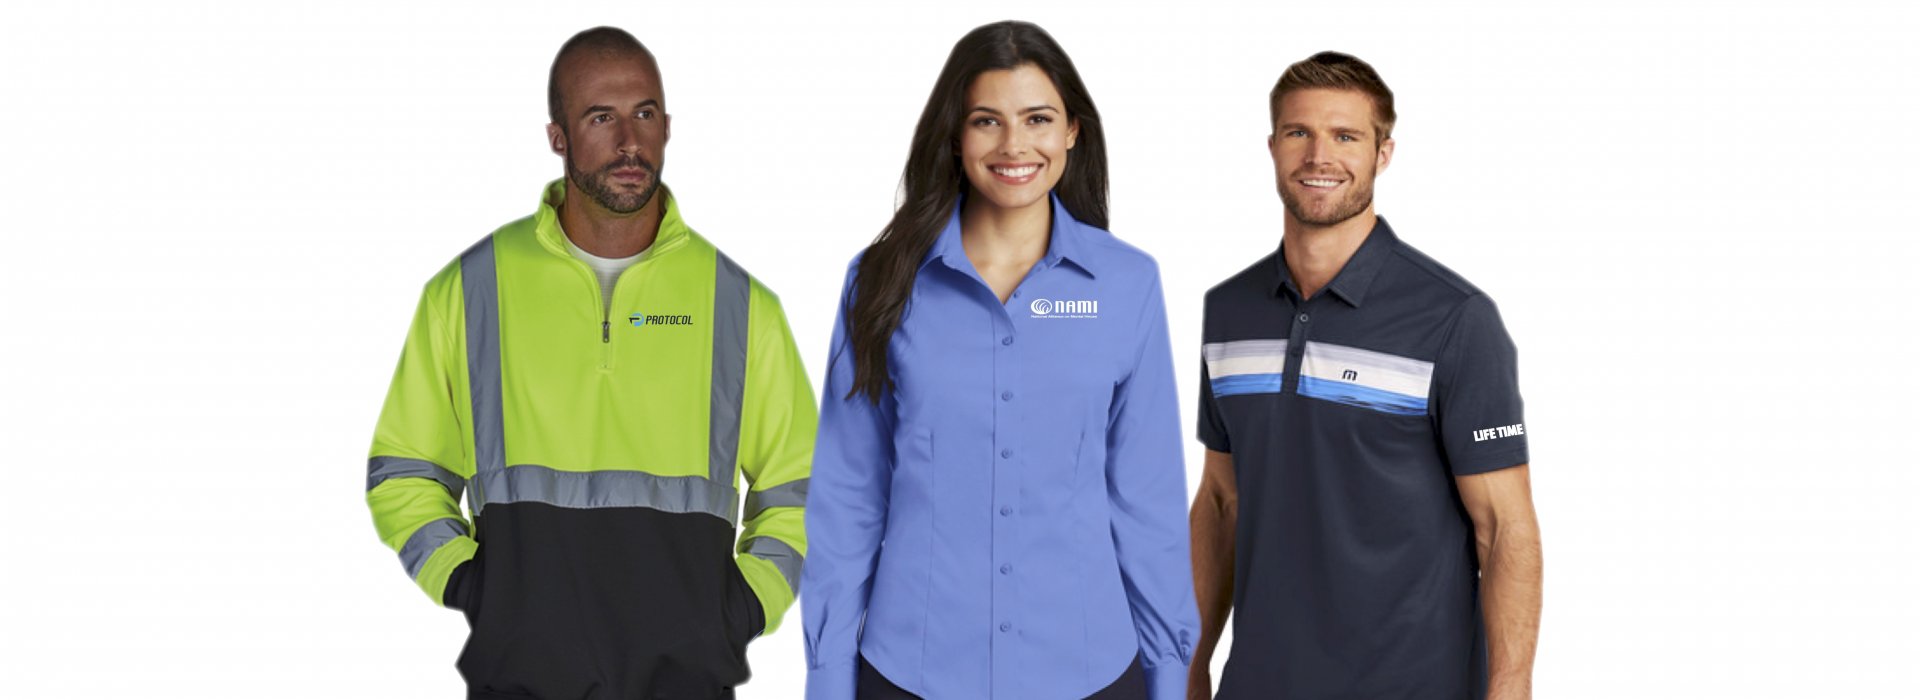 group of employees with custom shirts